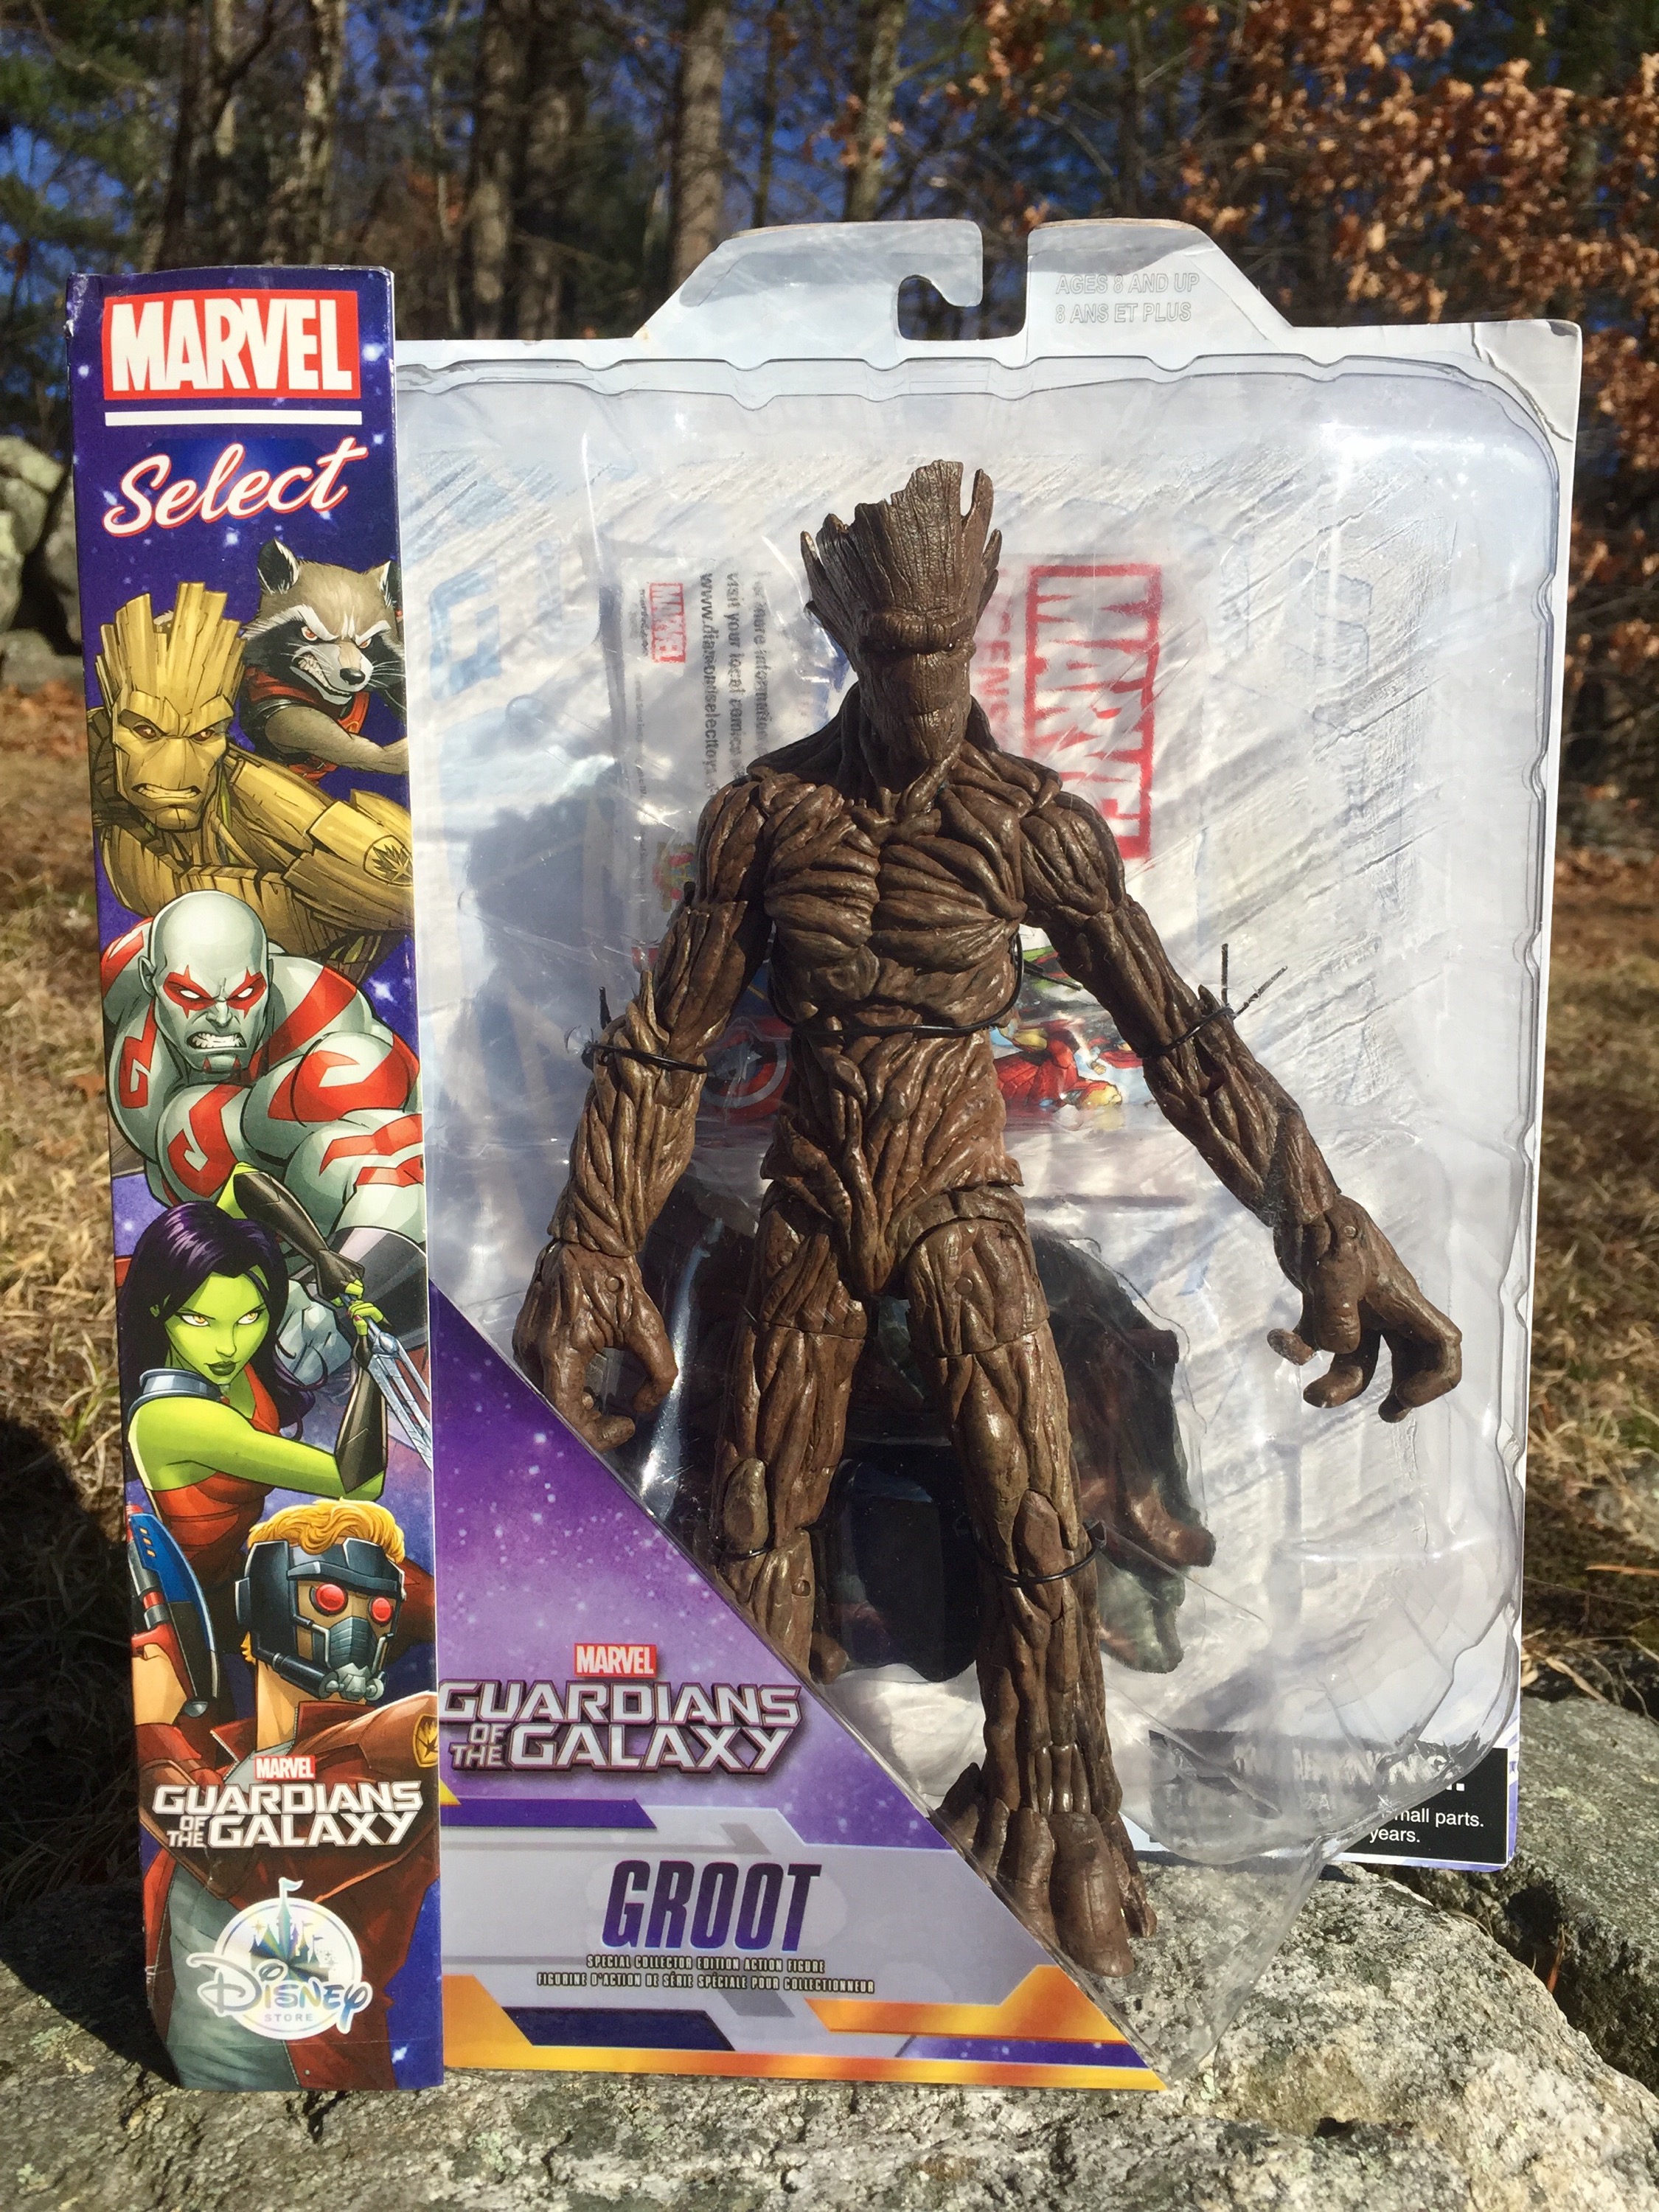 Exclusive Marvel Select Groot Figure Review & Photos - Marvel Toy News